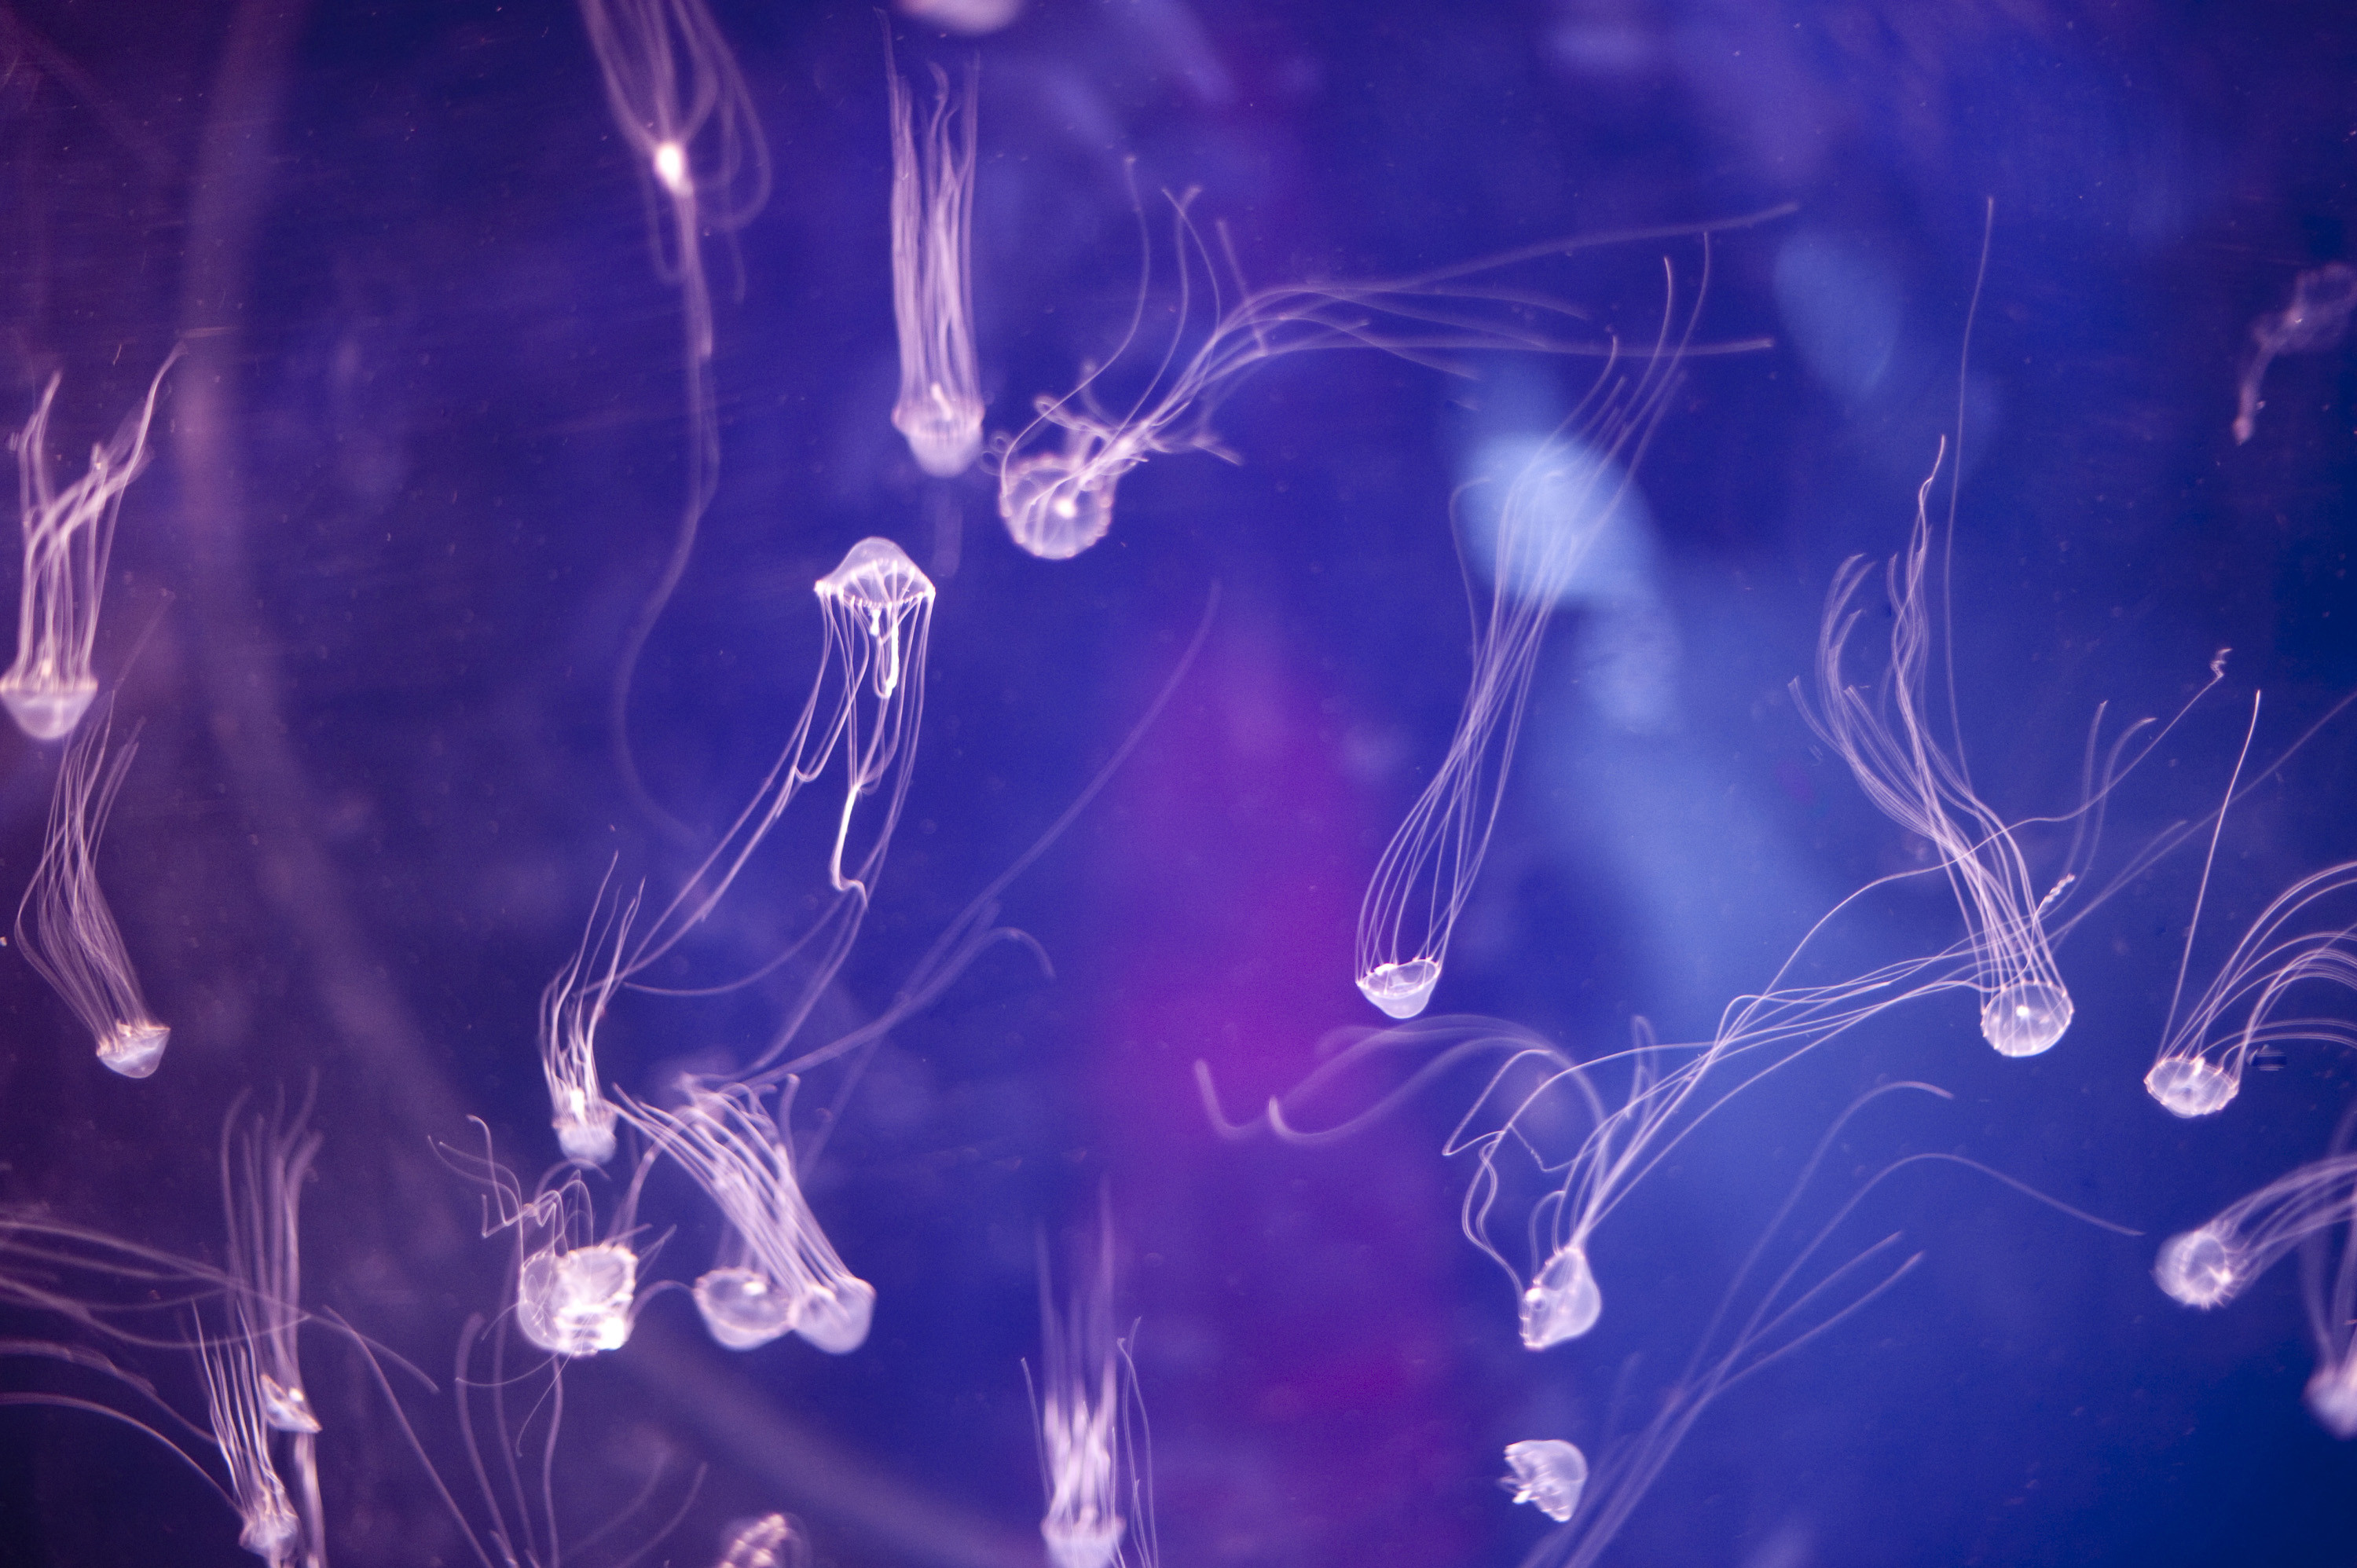 3000x1996 Bloom or swarm of tiny jellyfish illuminated in an aquarium with their  tentacles trailing out behind